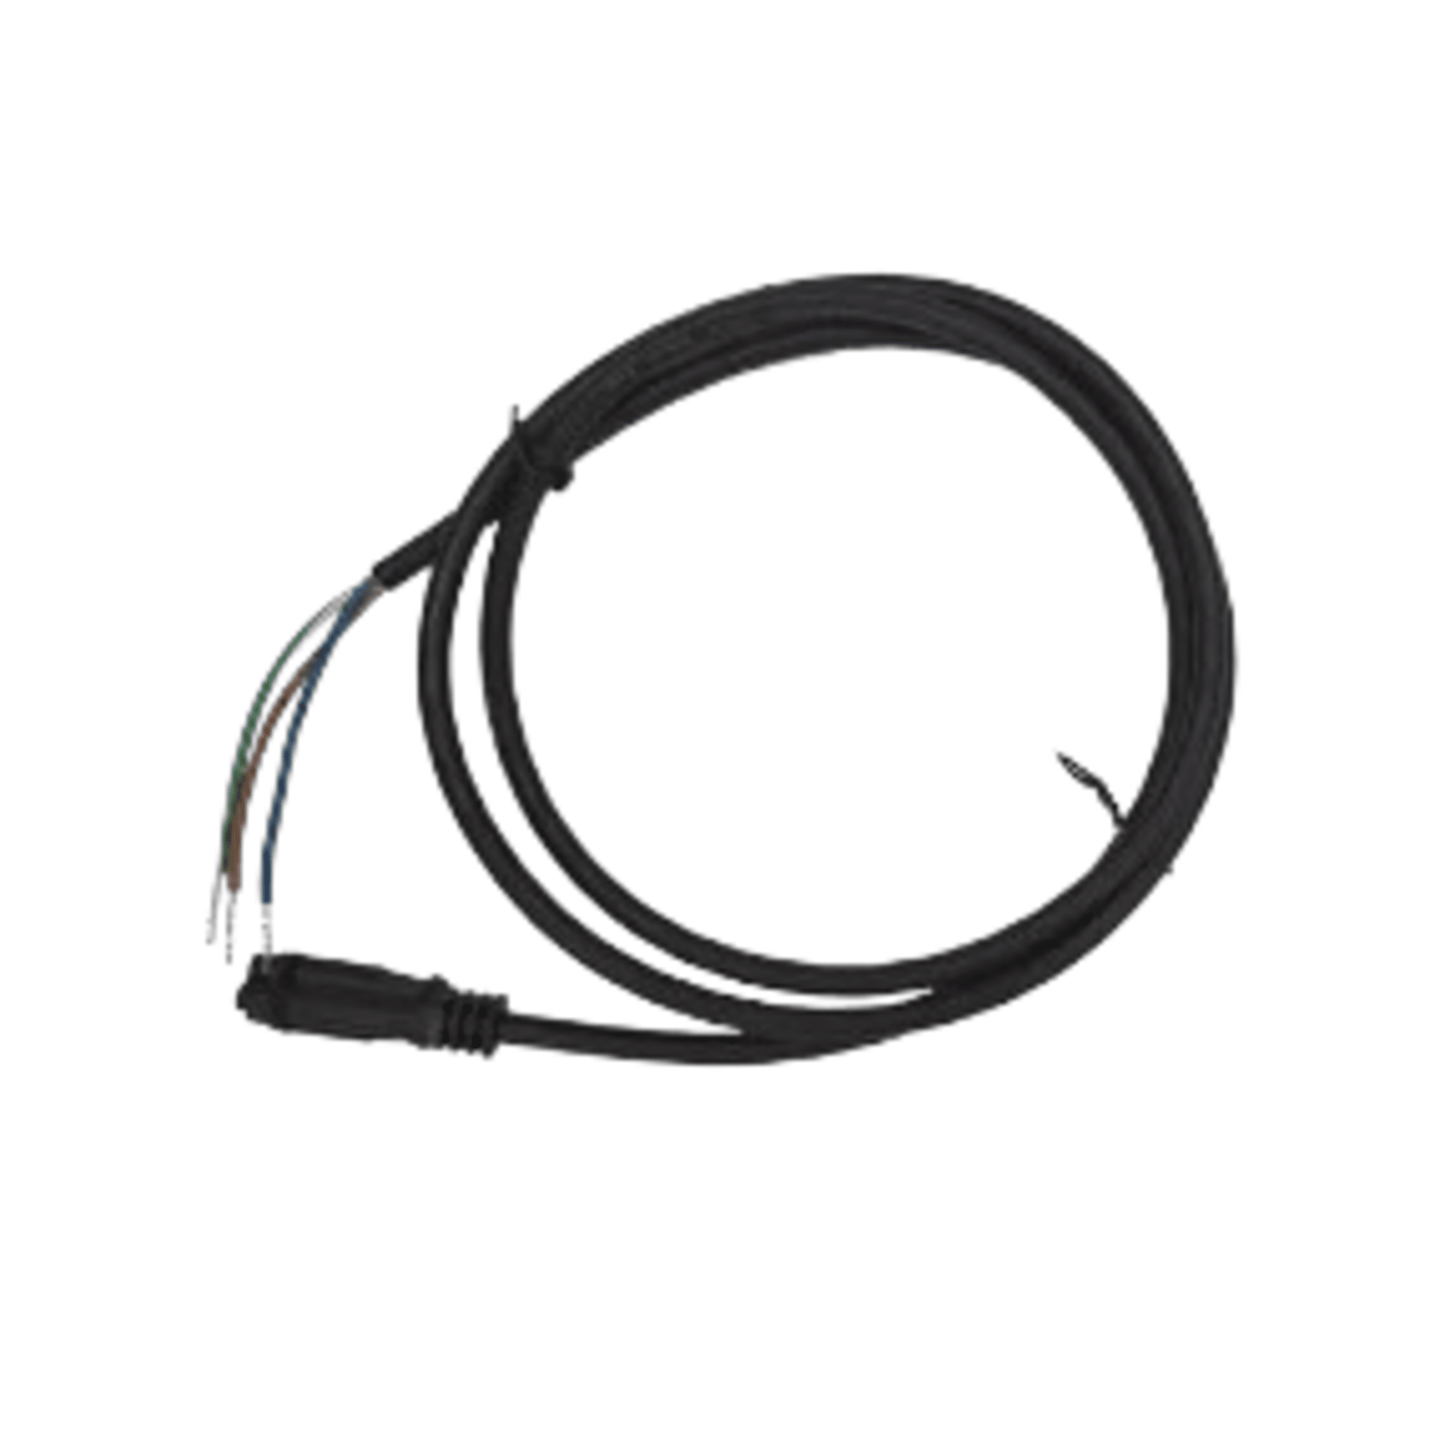 Refco 3004139, Power cable for condensate pumps